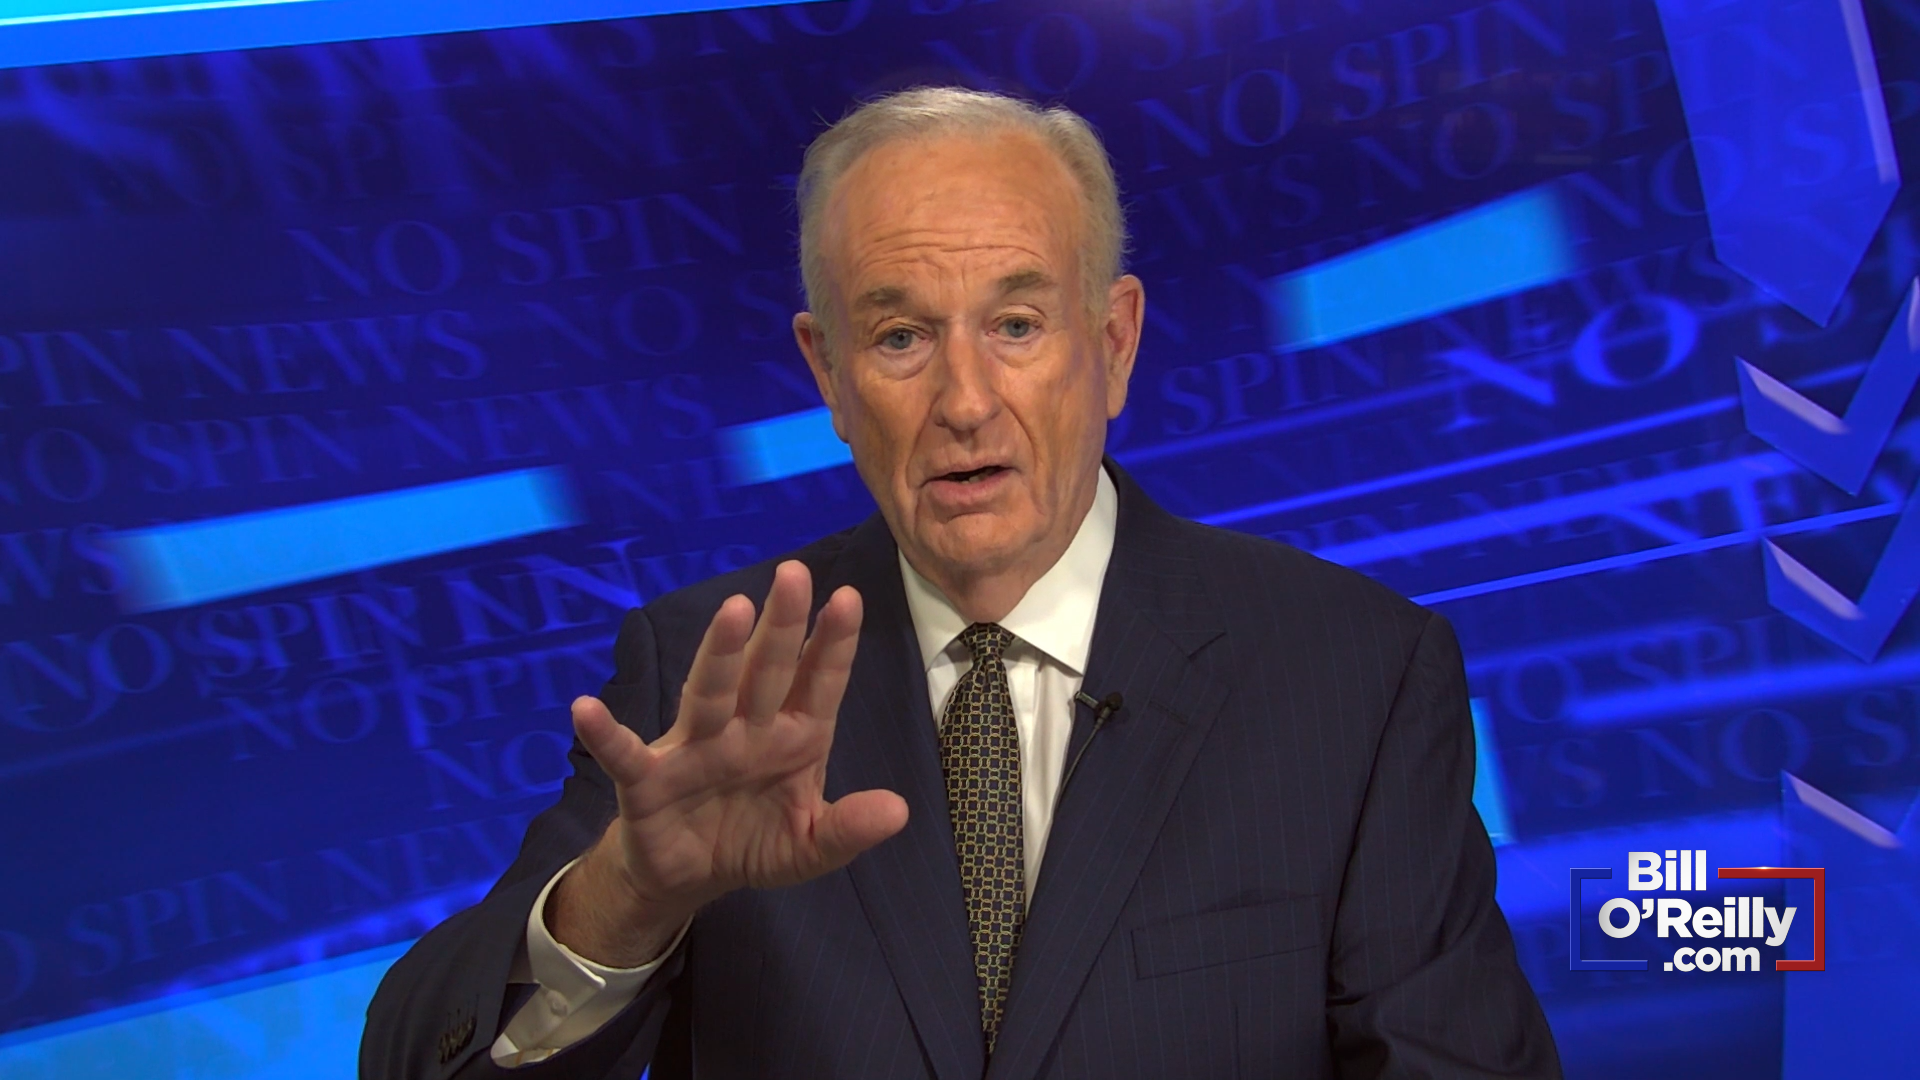 O'Reilly on Biden Gaffes: 'All Our Enemies Are Watching Us'